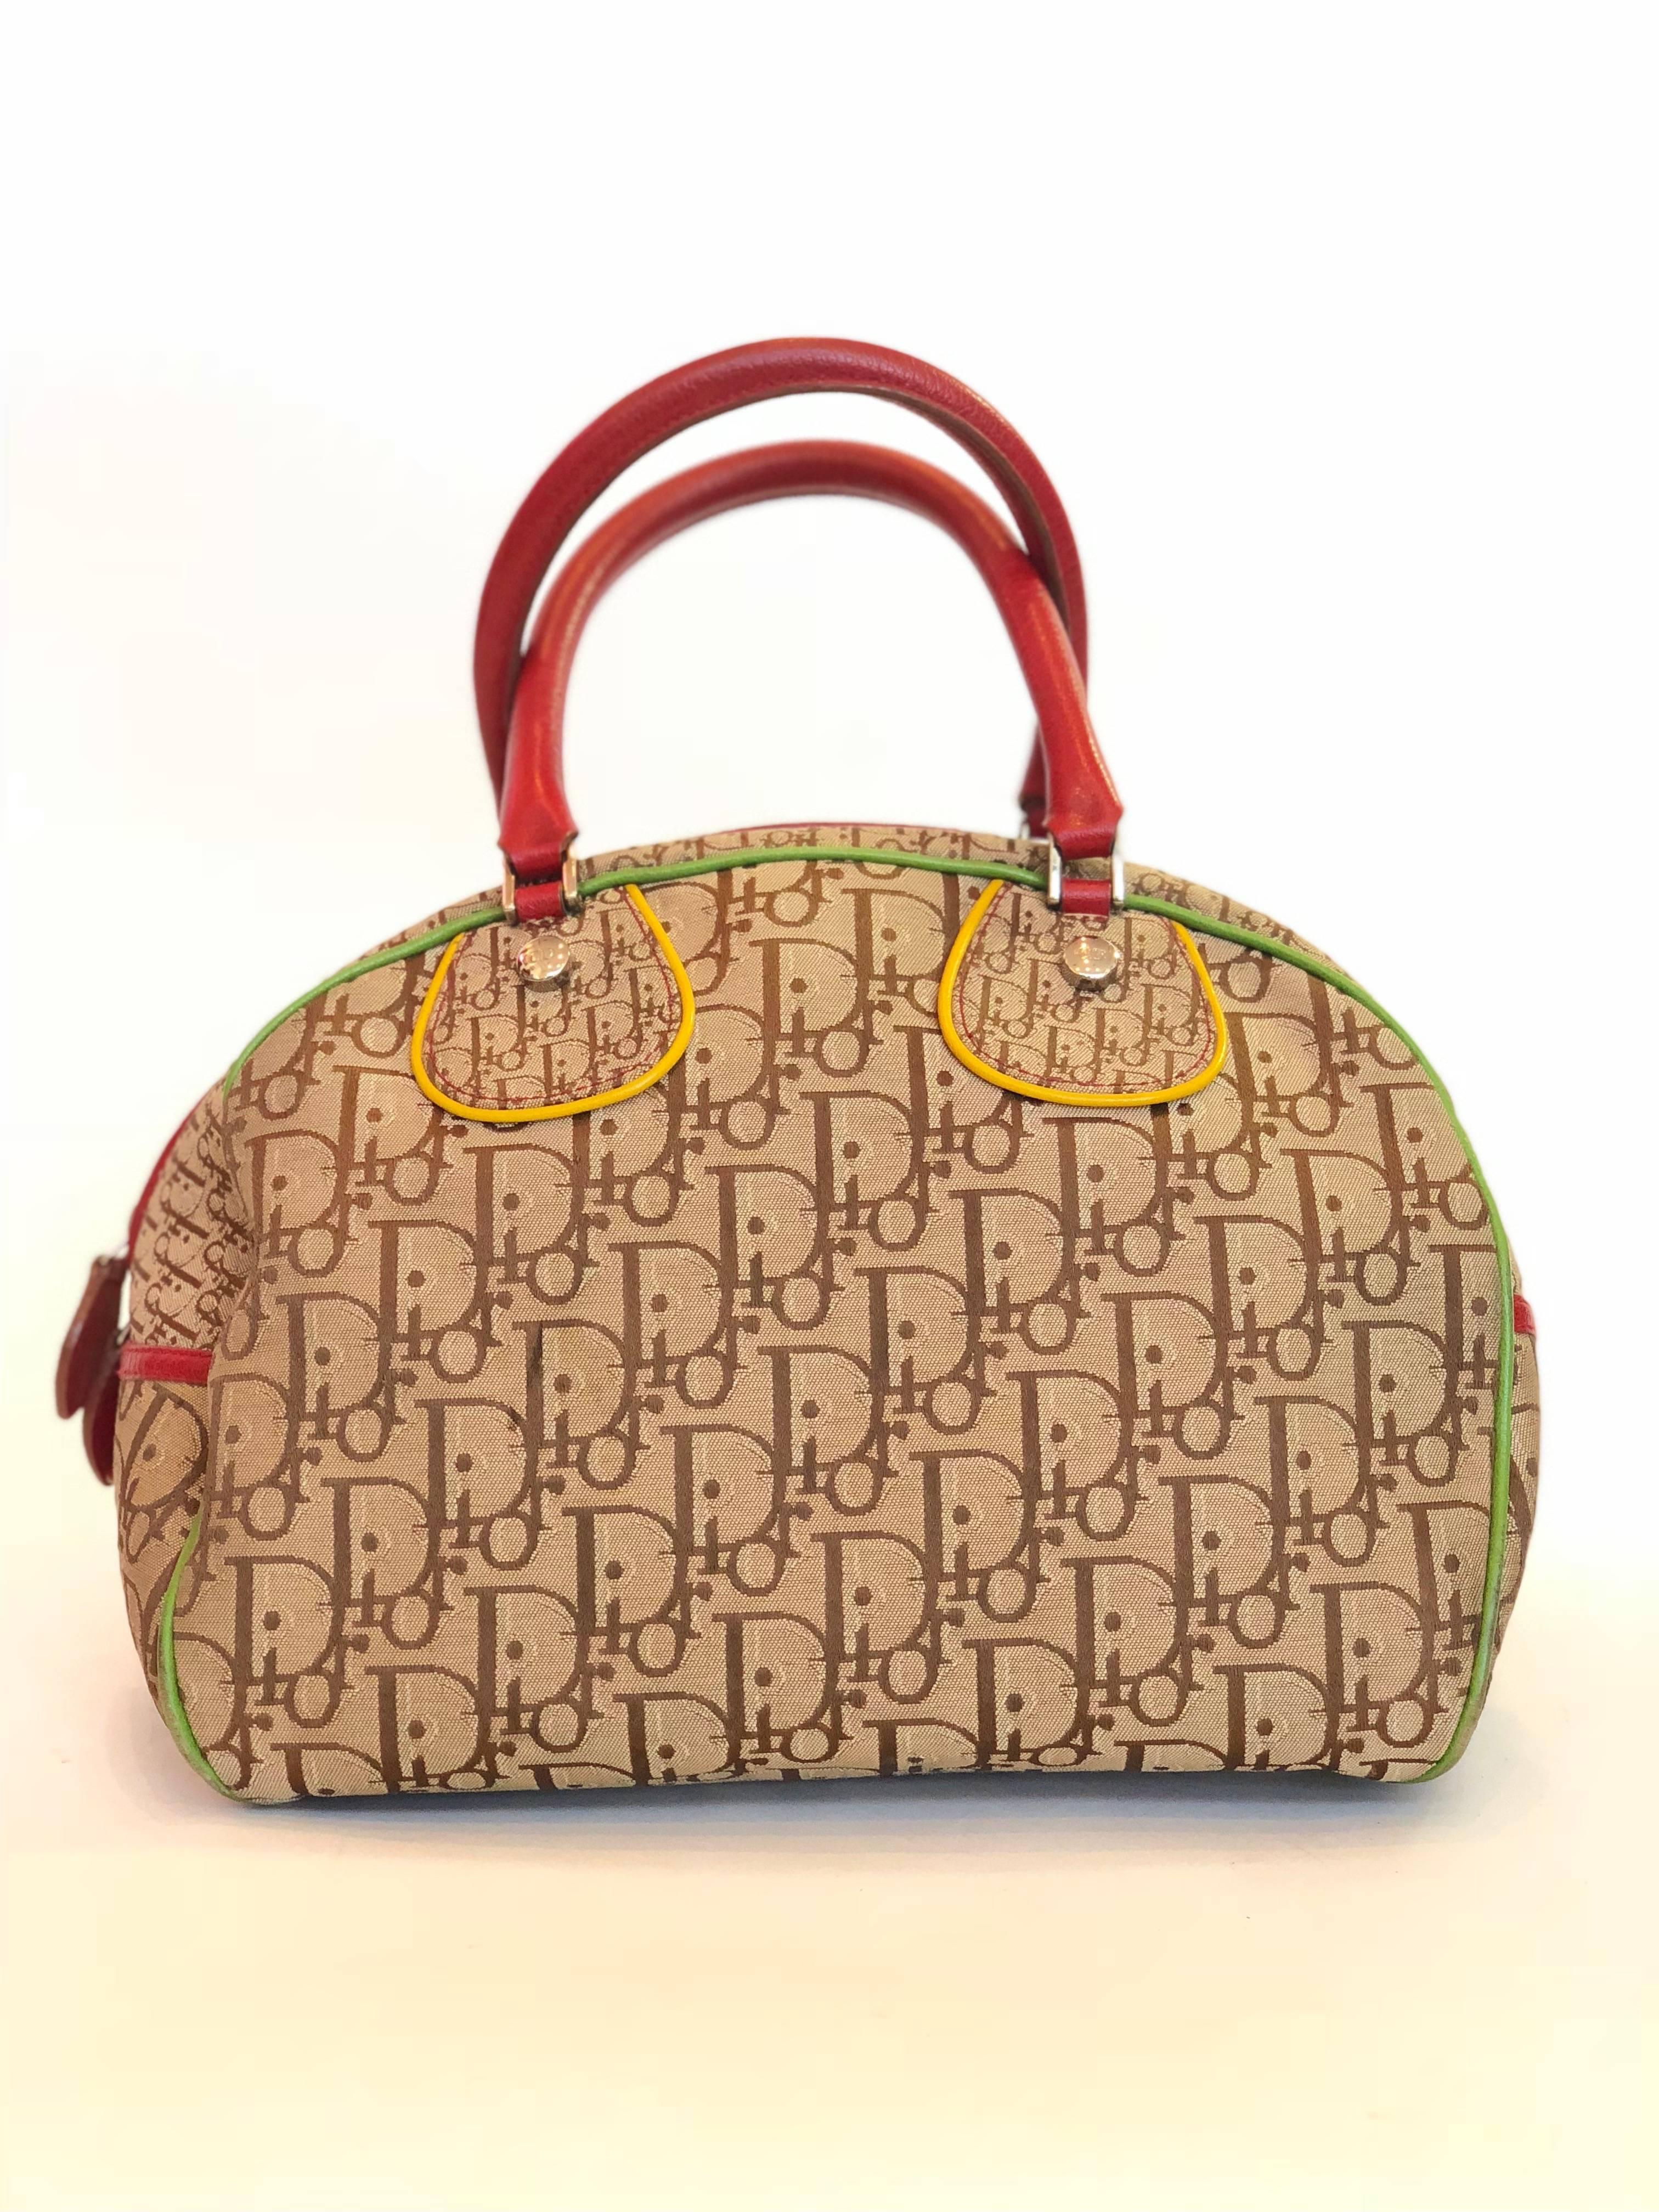 Christian Dior Iconic Monogram Canvas Rasta Satchel Bag Limited Edition with multi color leather trim. Double rolled handles and double zipped top. Chocolate brown nylon lining. 

*MEASUREMENTS*
Height: 8